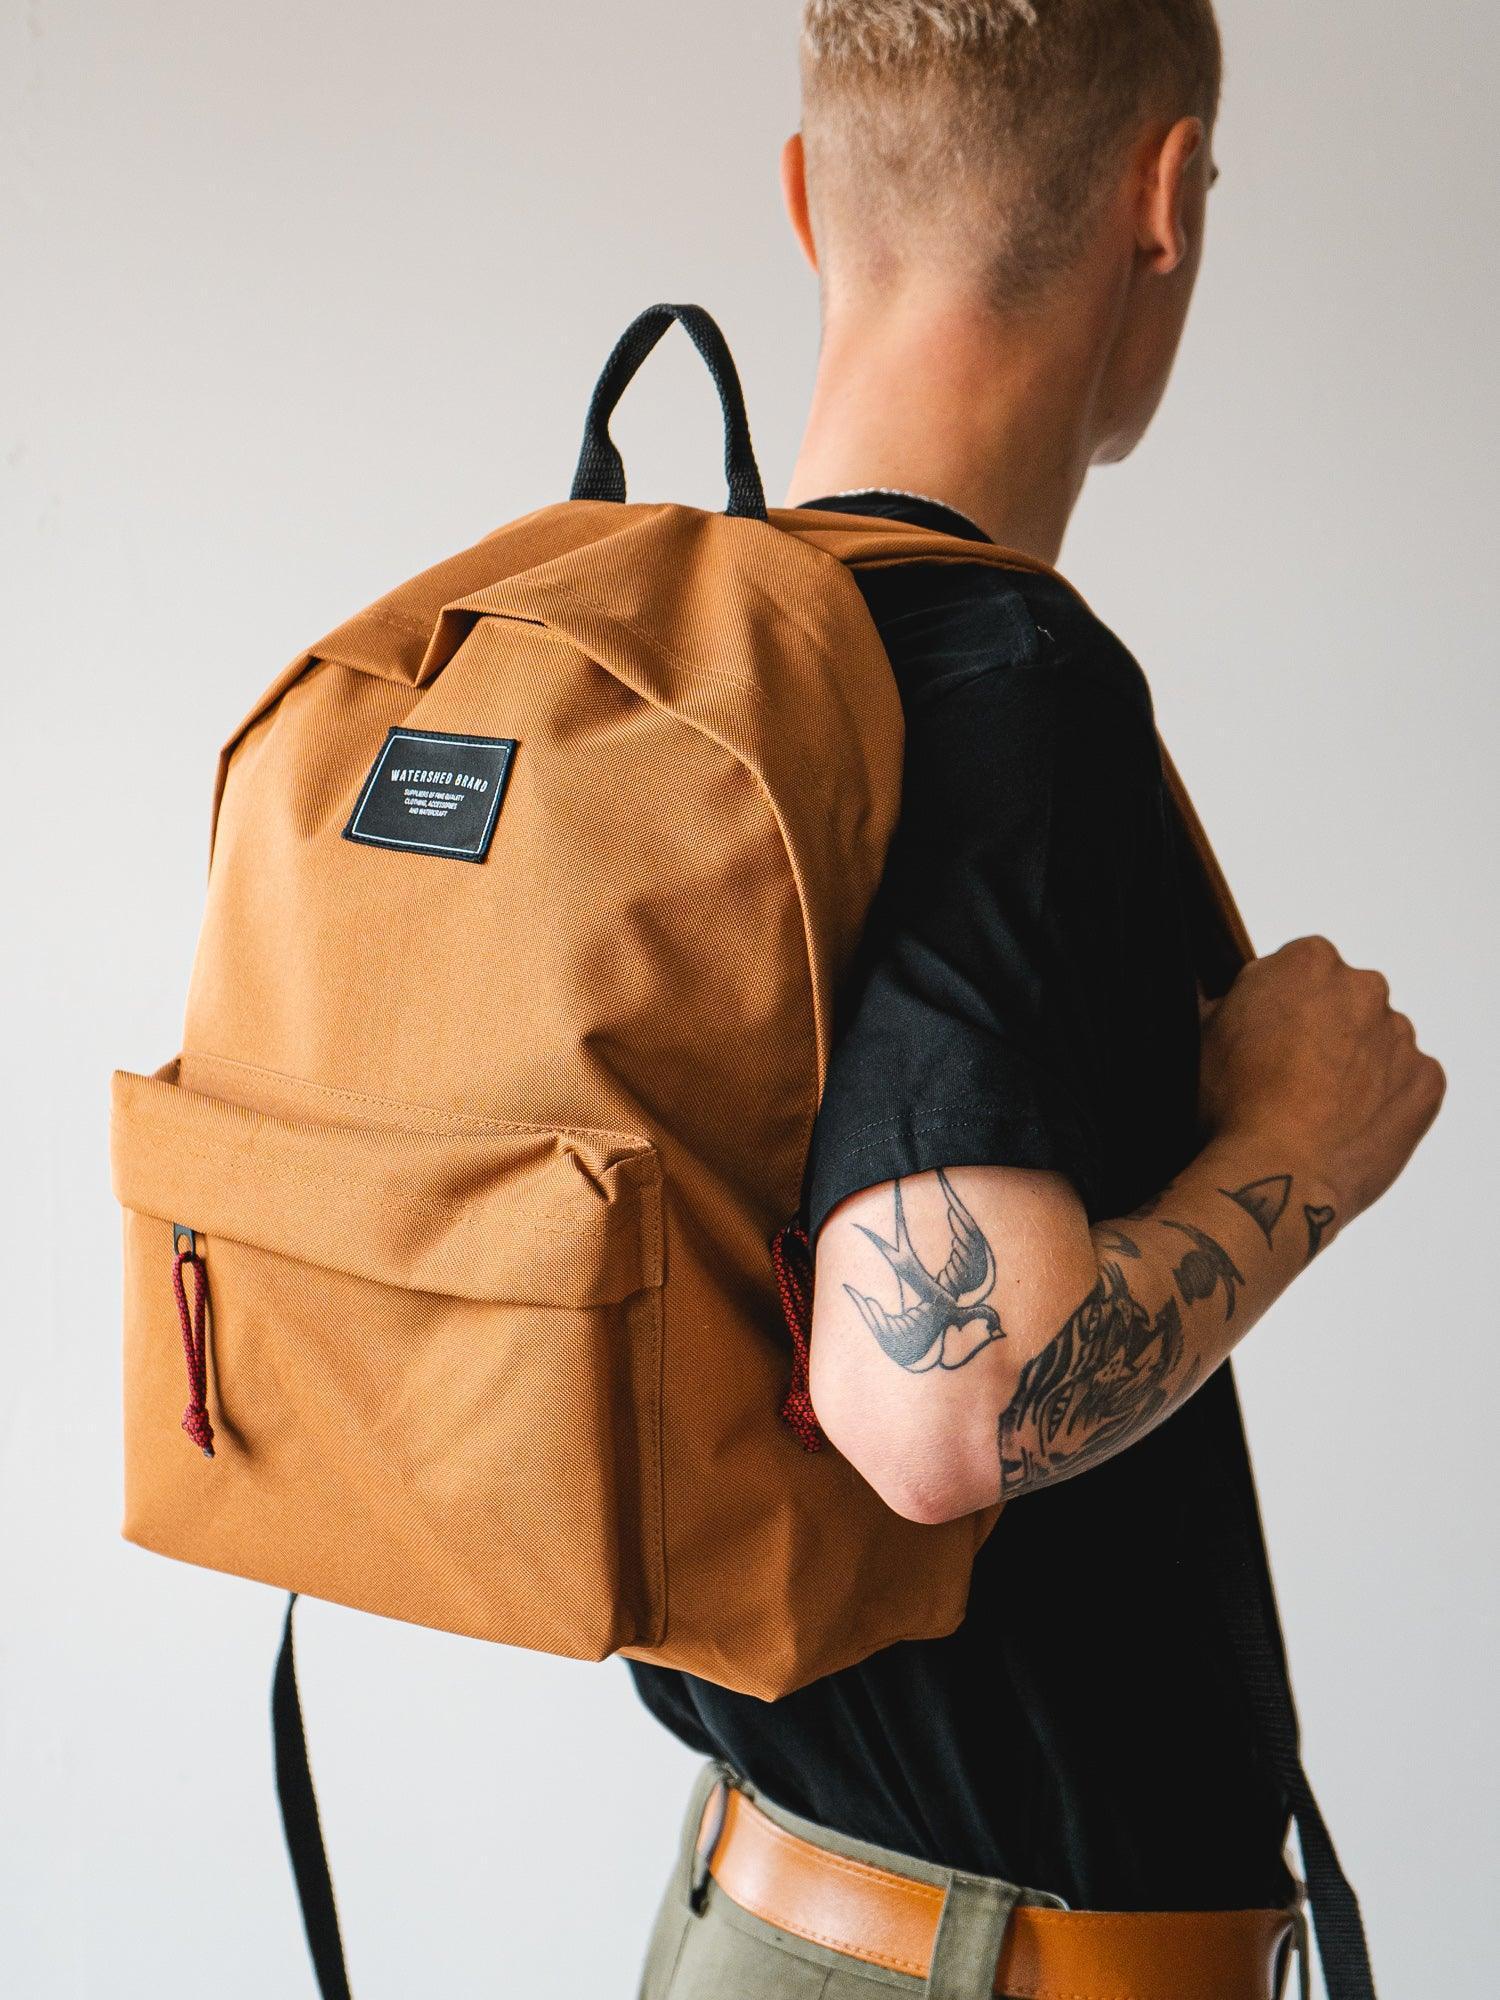 Watershed Brand Union Backpack - Caramel - Lifestyle Brand Newquay 